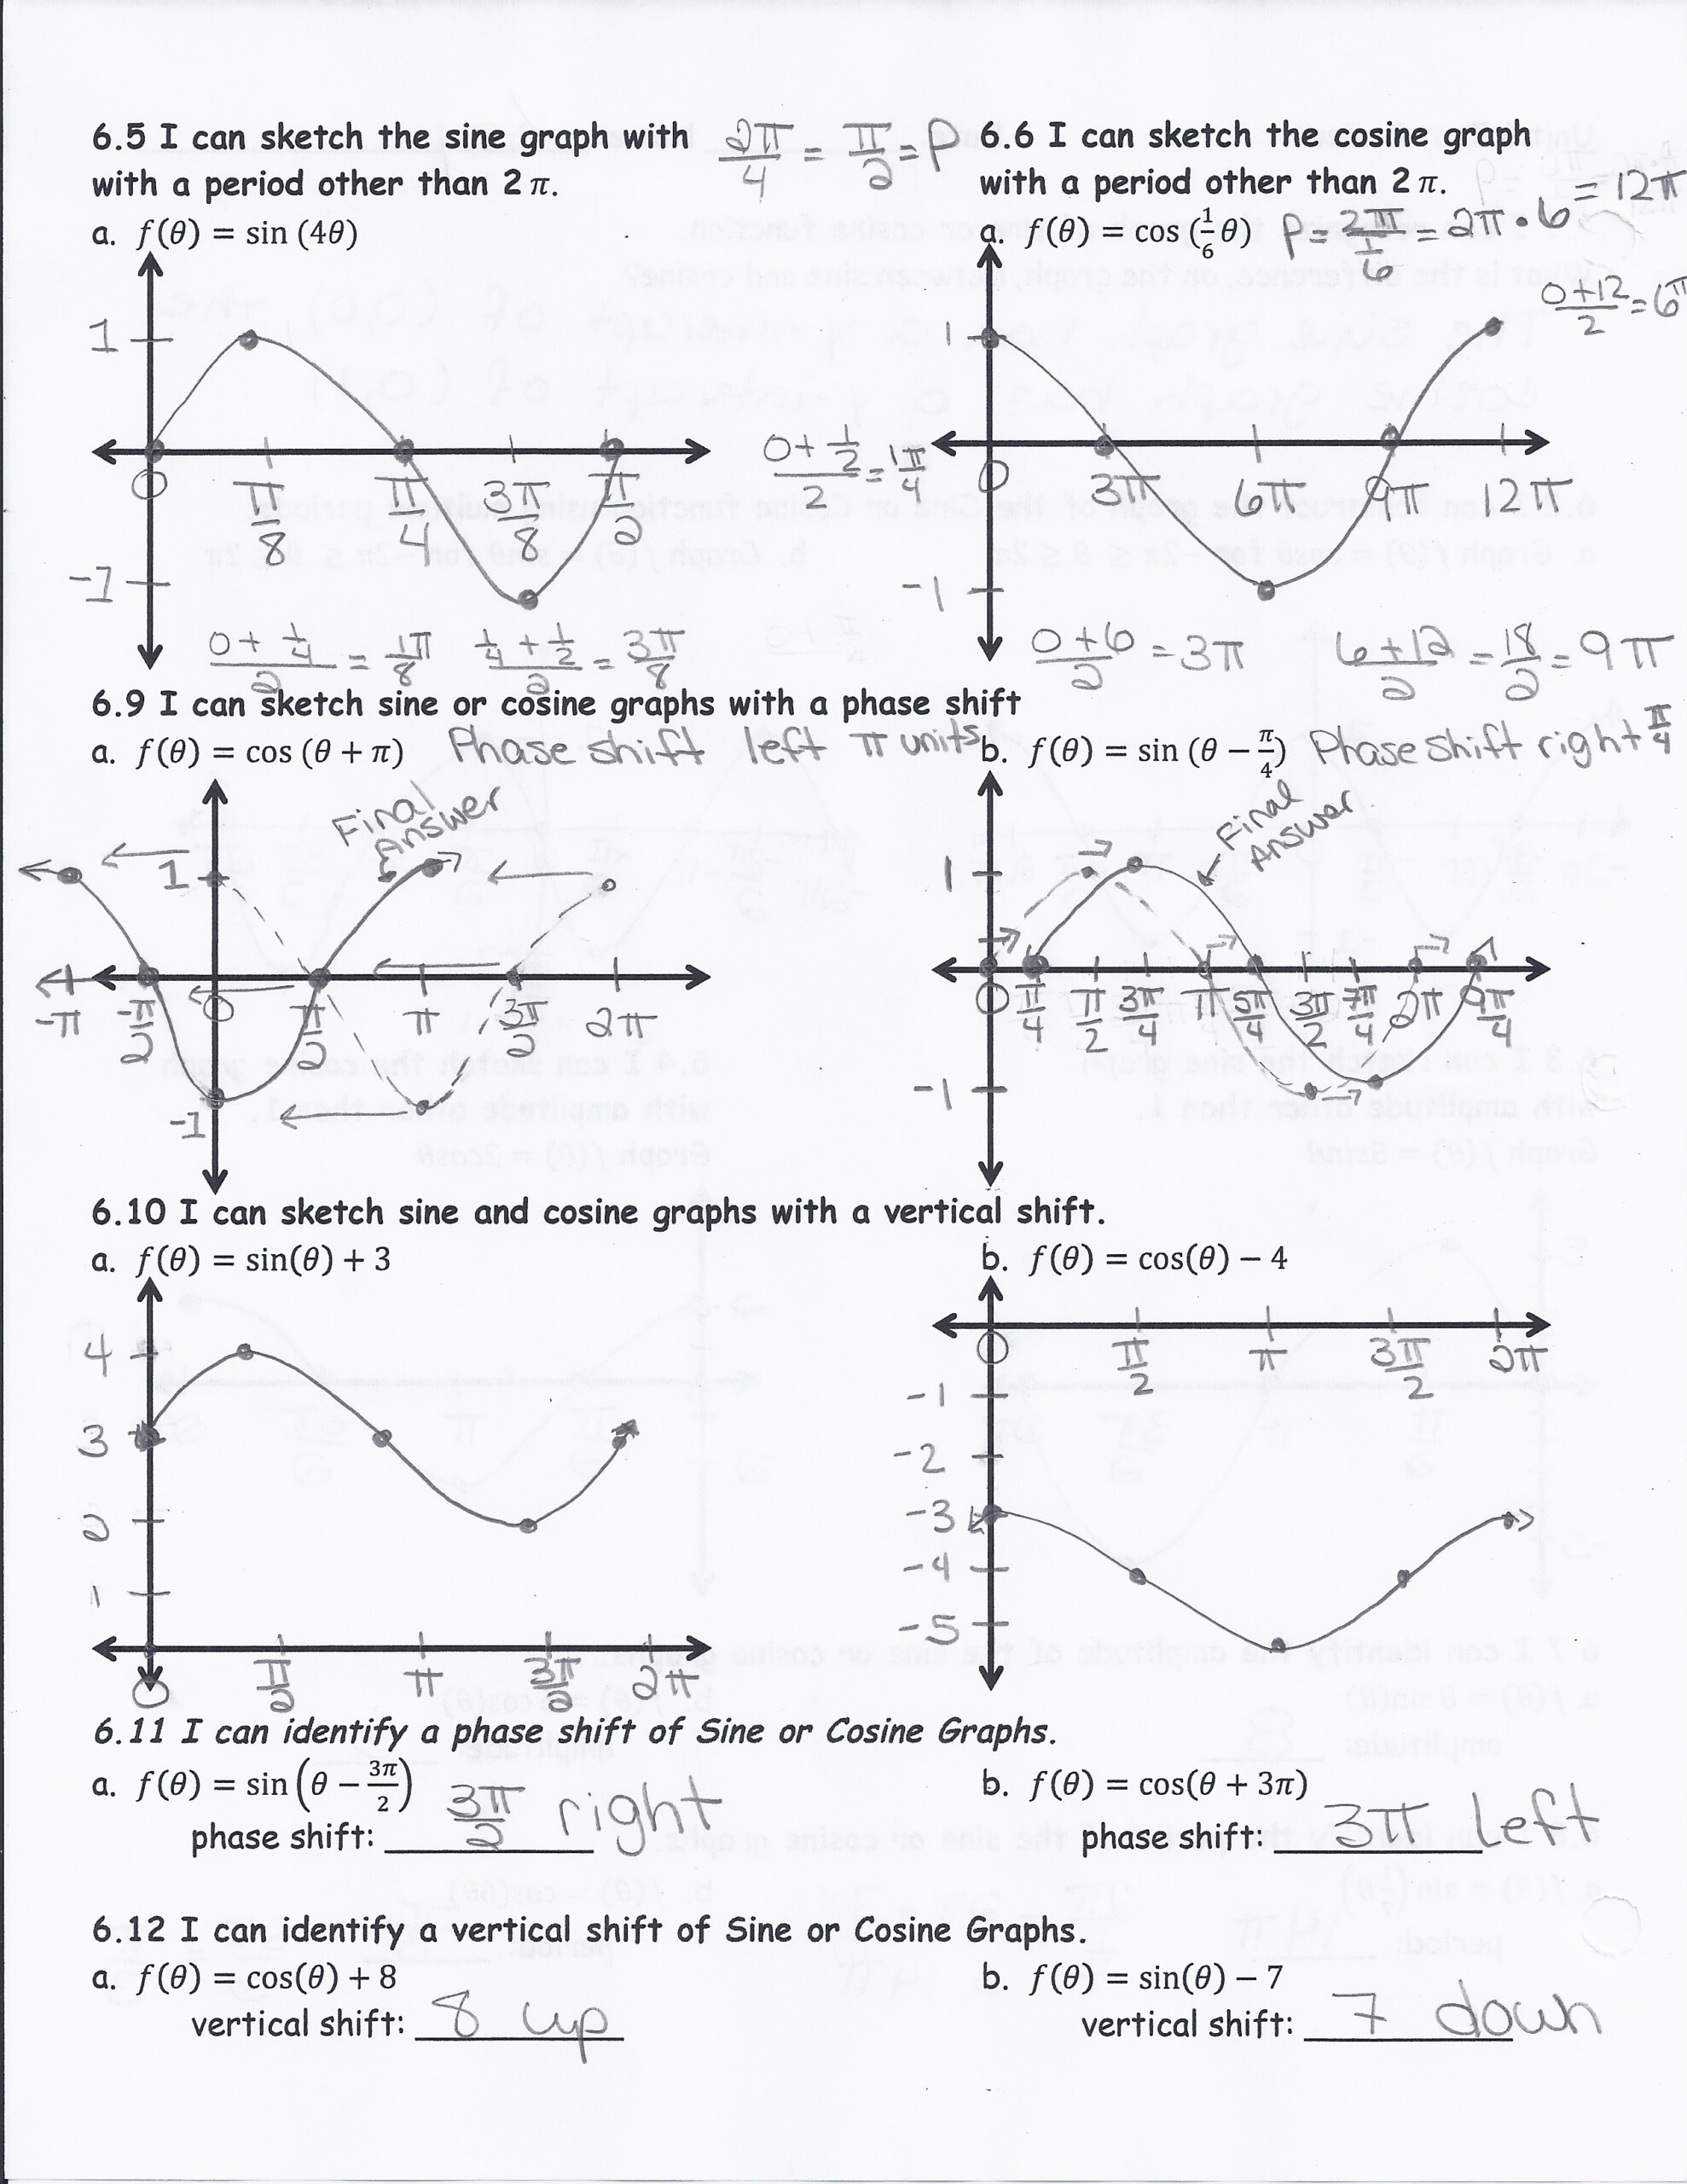 graphing-sine-and-cosine-functions-practice-worksheet-with-answers-function-worksheets